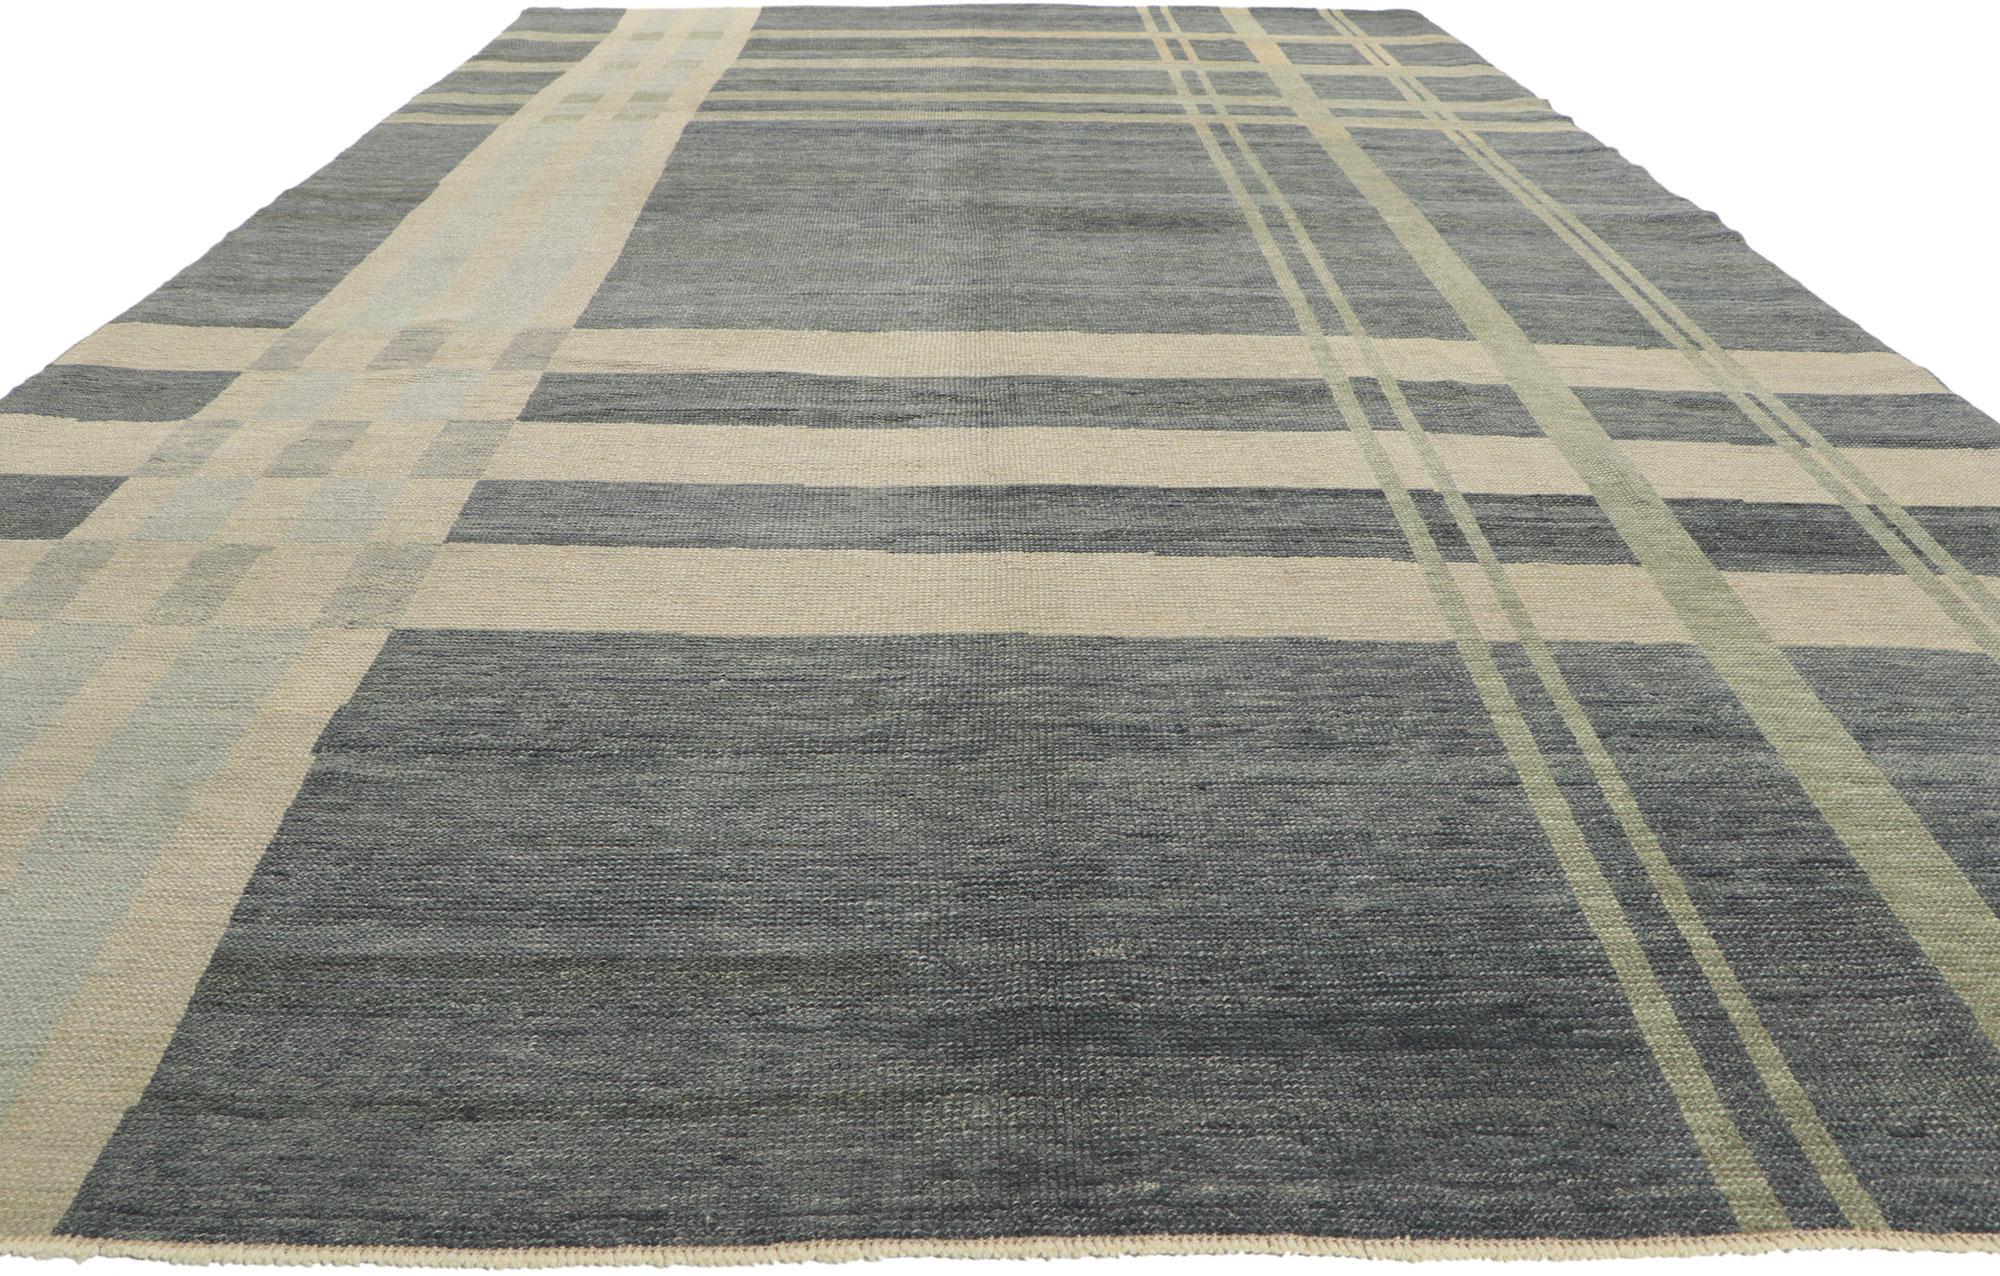 Turkish New Modern Plaid Tartan Rug with Ivy League Style For Sale